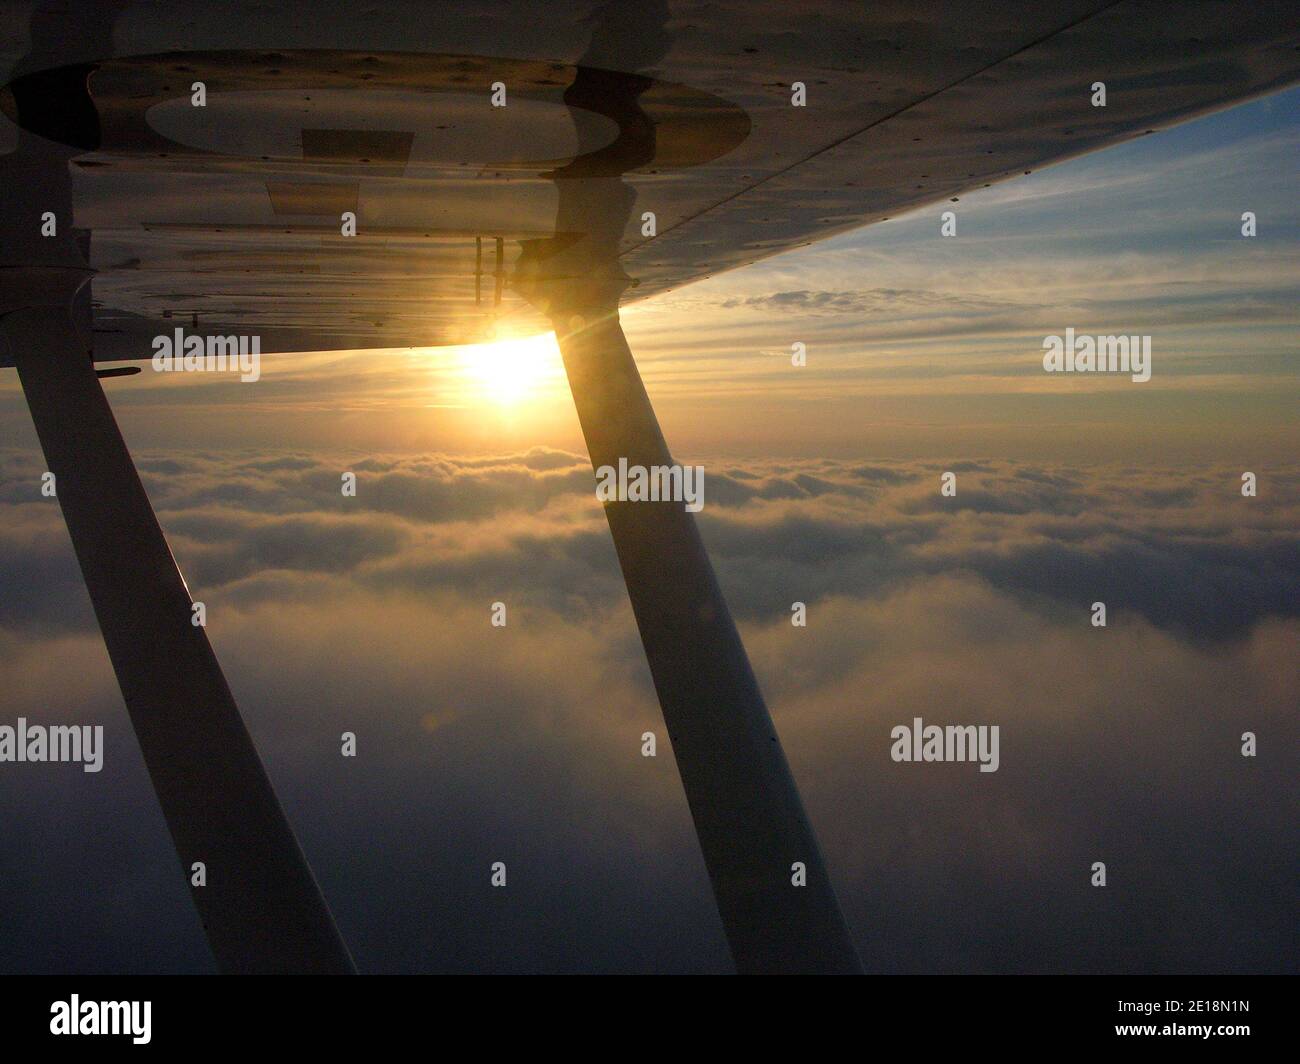 aerial view of the sun setting under the wing of a light aircraft (Piper PA18 Super Cub), UK skies Stock Photo